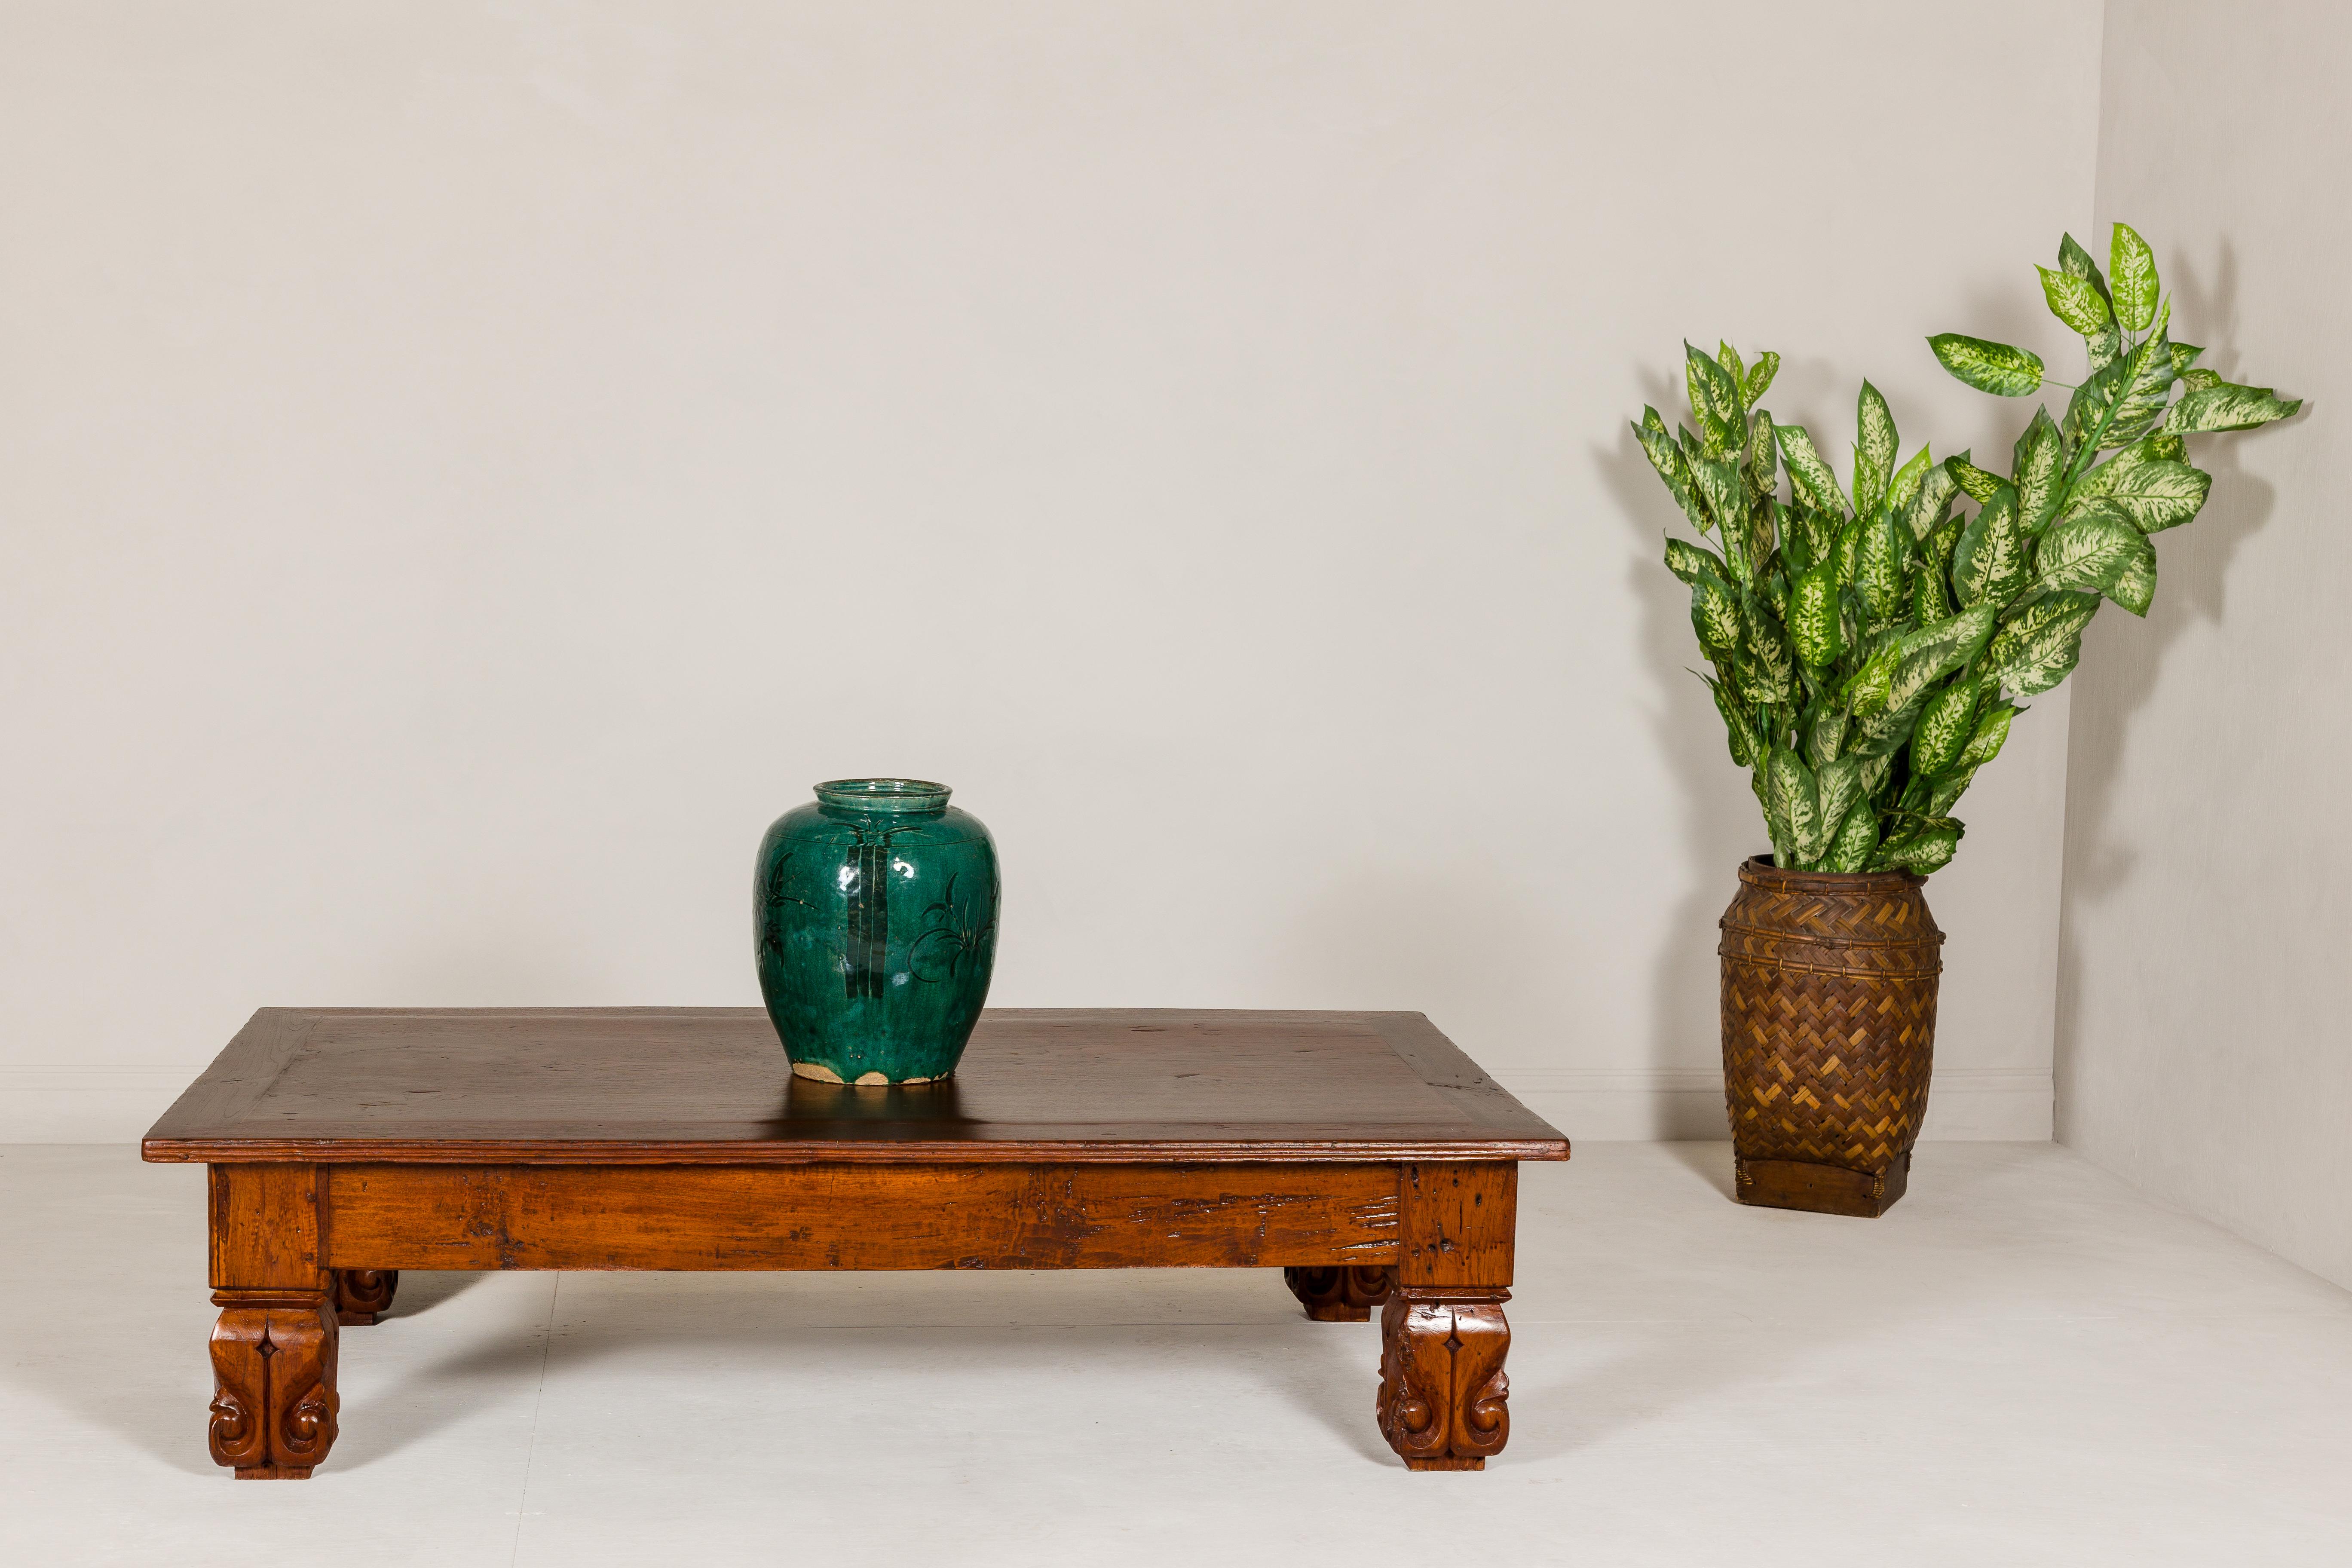 A teak wood low coffee table from the 19th century with carved legs and brown patina. This 19th-century teak wood coffee table is a true testament to the enduring beauty of antique craftsmanship. Its simple yet sturdy design, combined with a rich